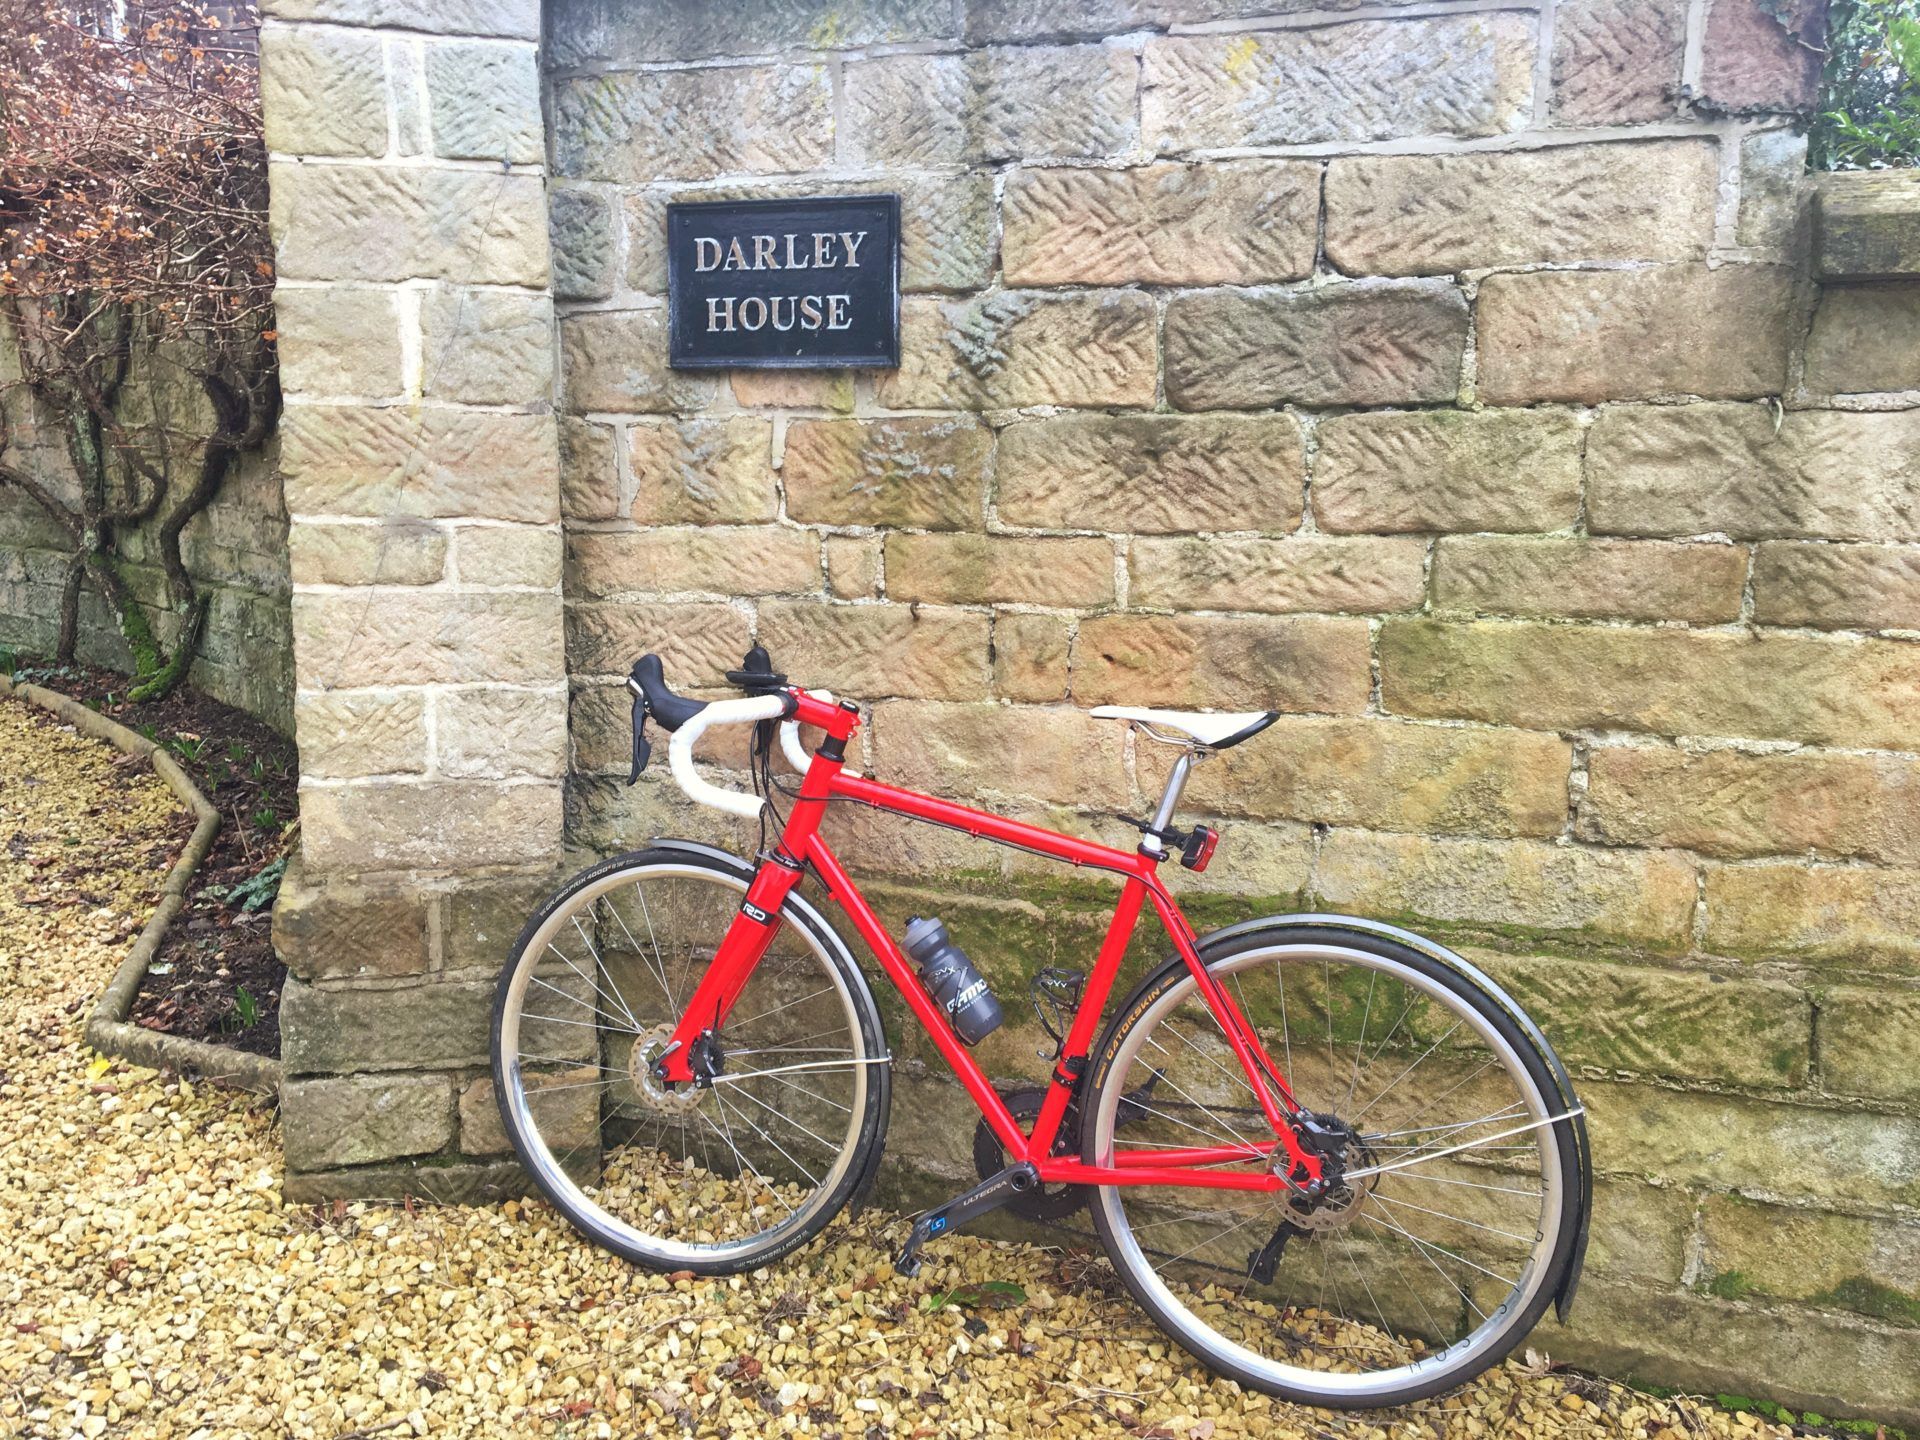 A red road bike propped up against the stone wall showing the Darley House name sign